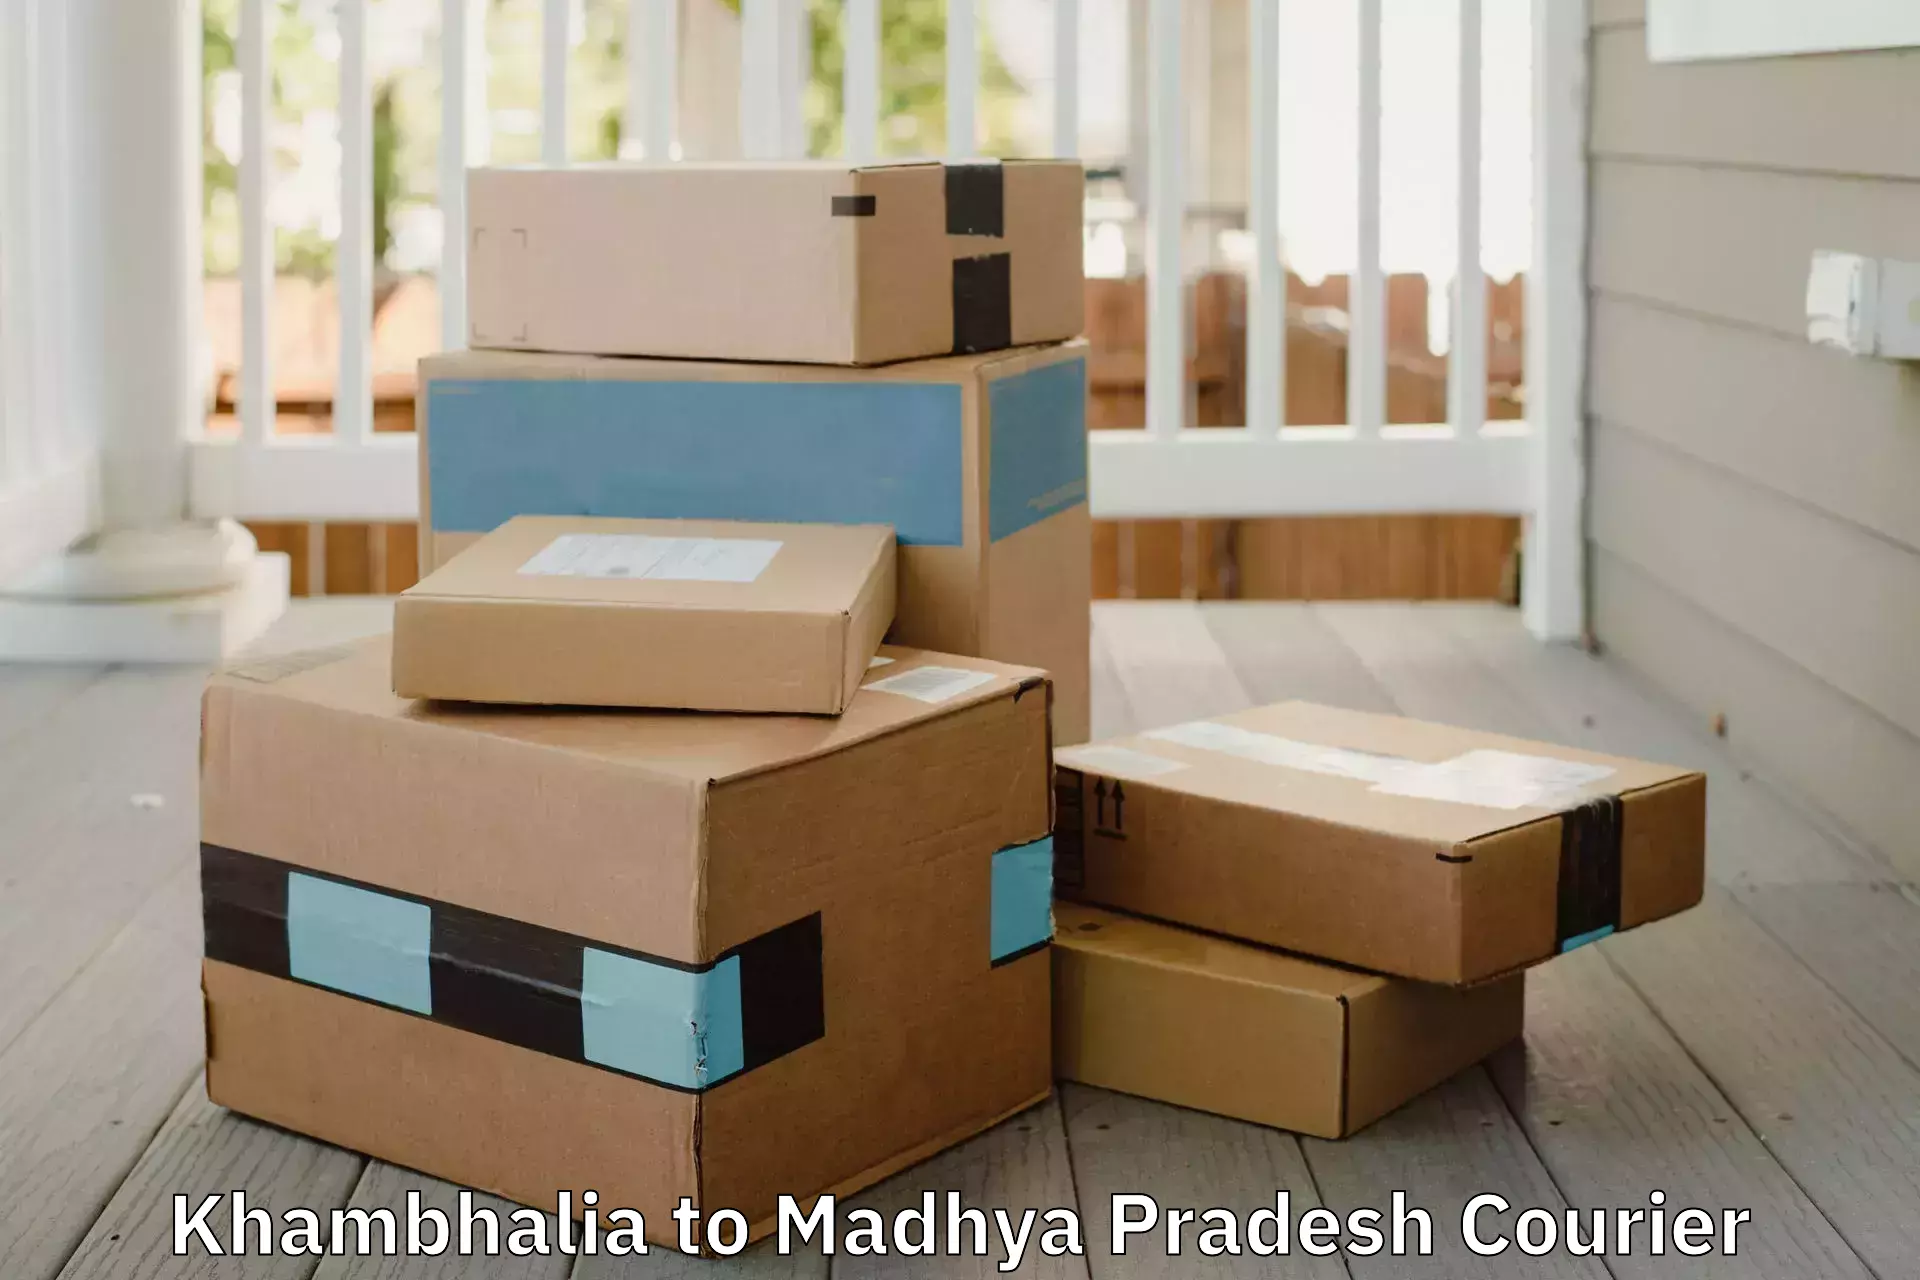 Reliable relocation services in Khambhalia to Nainpur